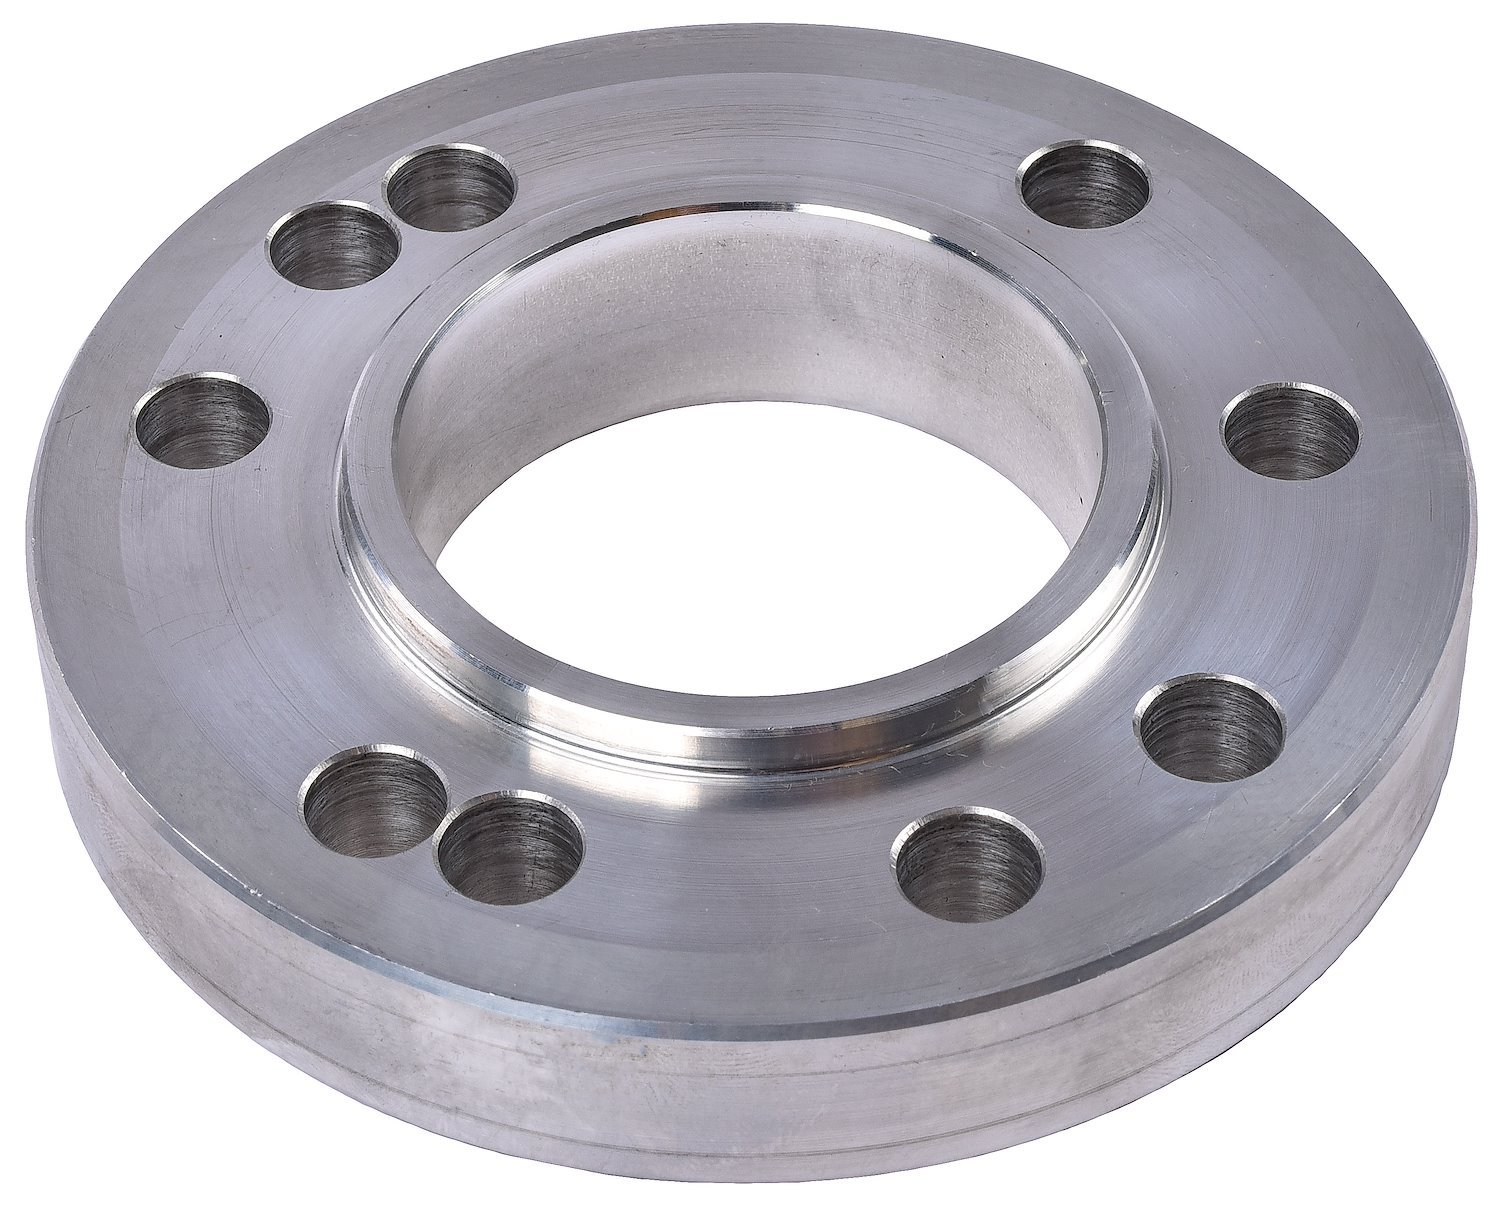 Gilmer Drive Crankshaft Spacer for Small Block Mopar 318/340/360 [1/2 in. Thickness]